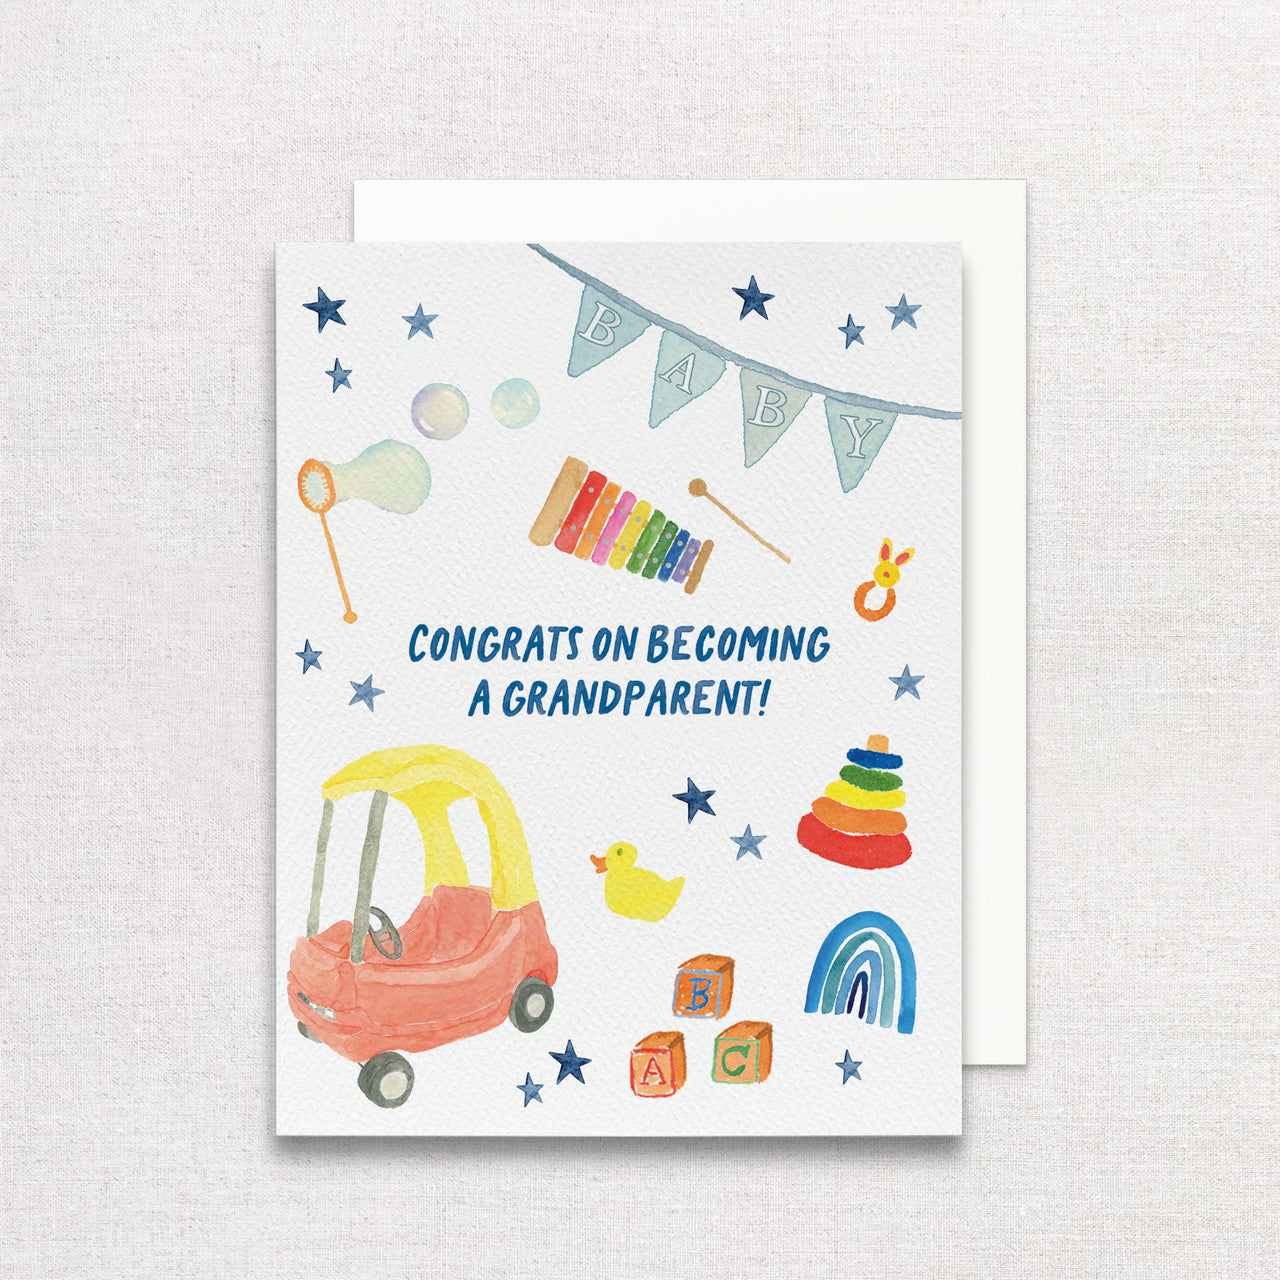 Congrats on Becoming A Grandparent Greeting Card Greeting Card by Gert & Co